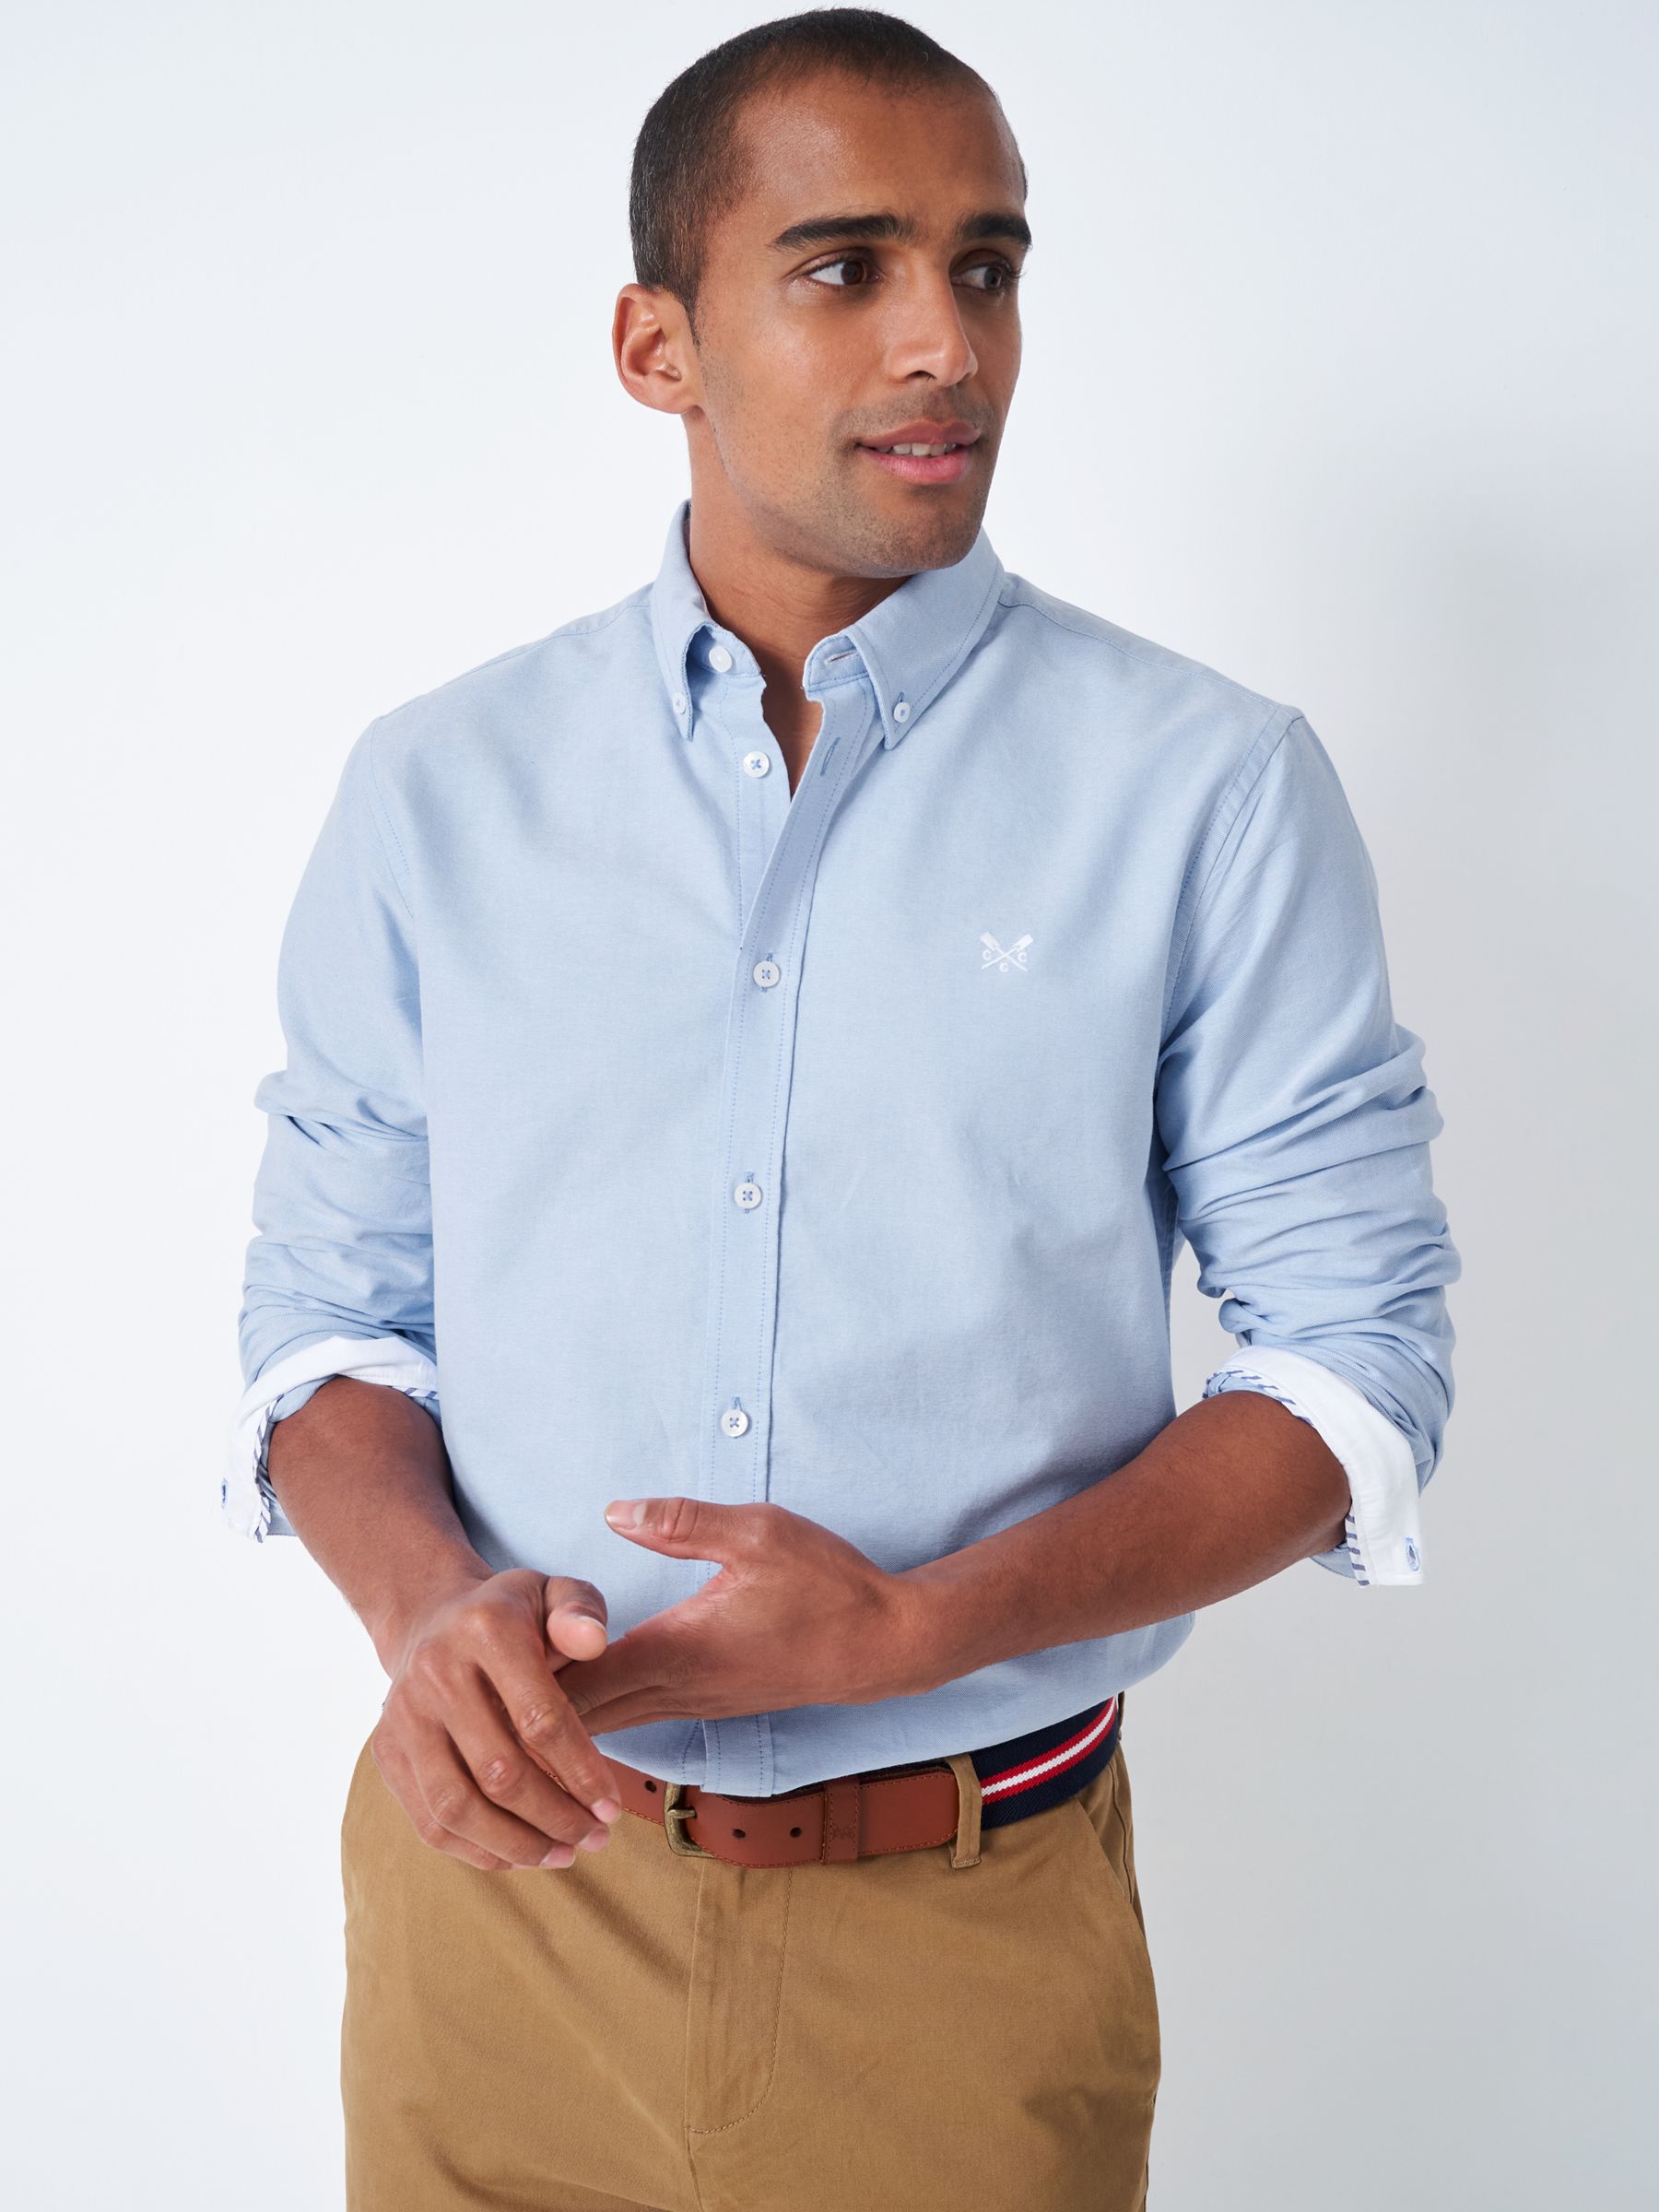 How to wear the Oxford shirt, Fashion